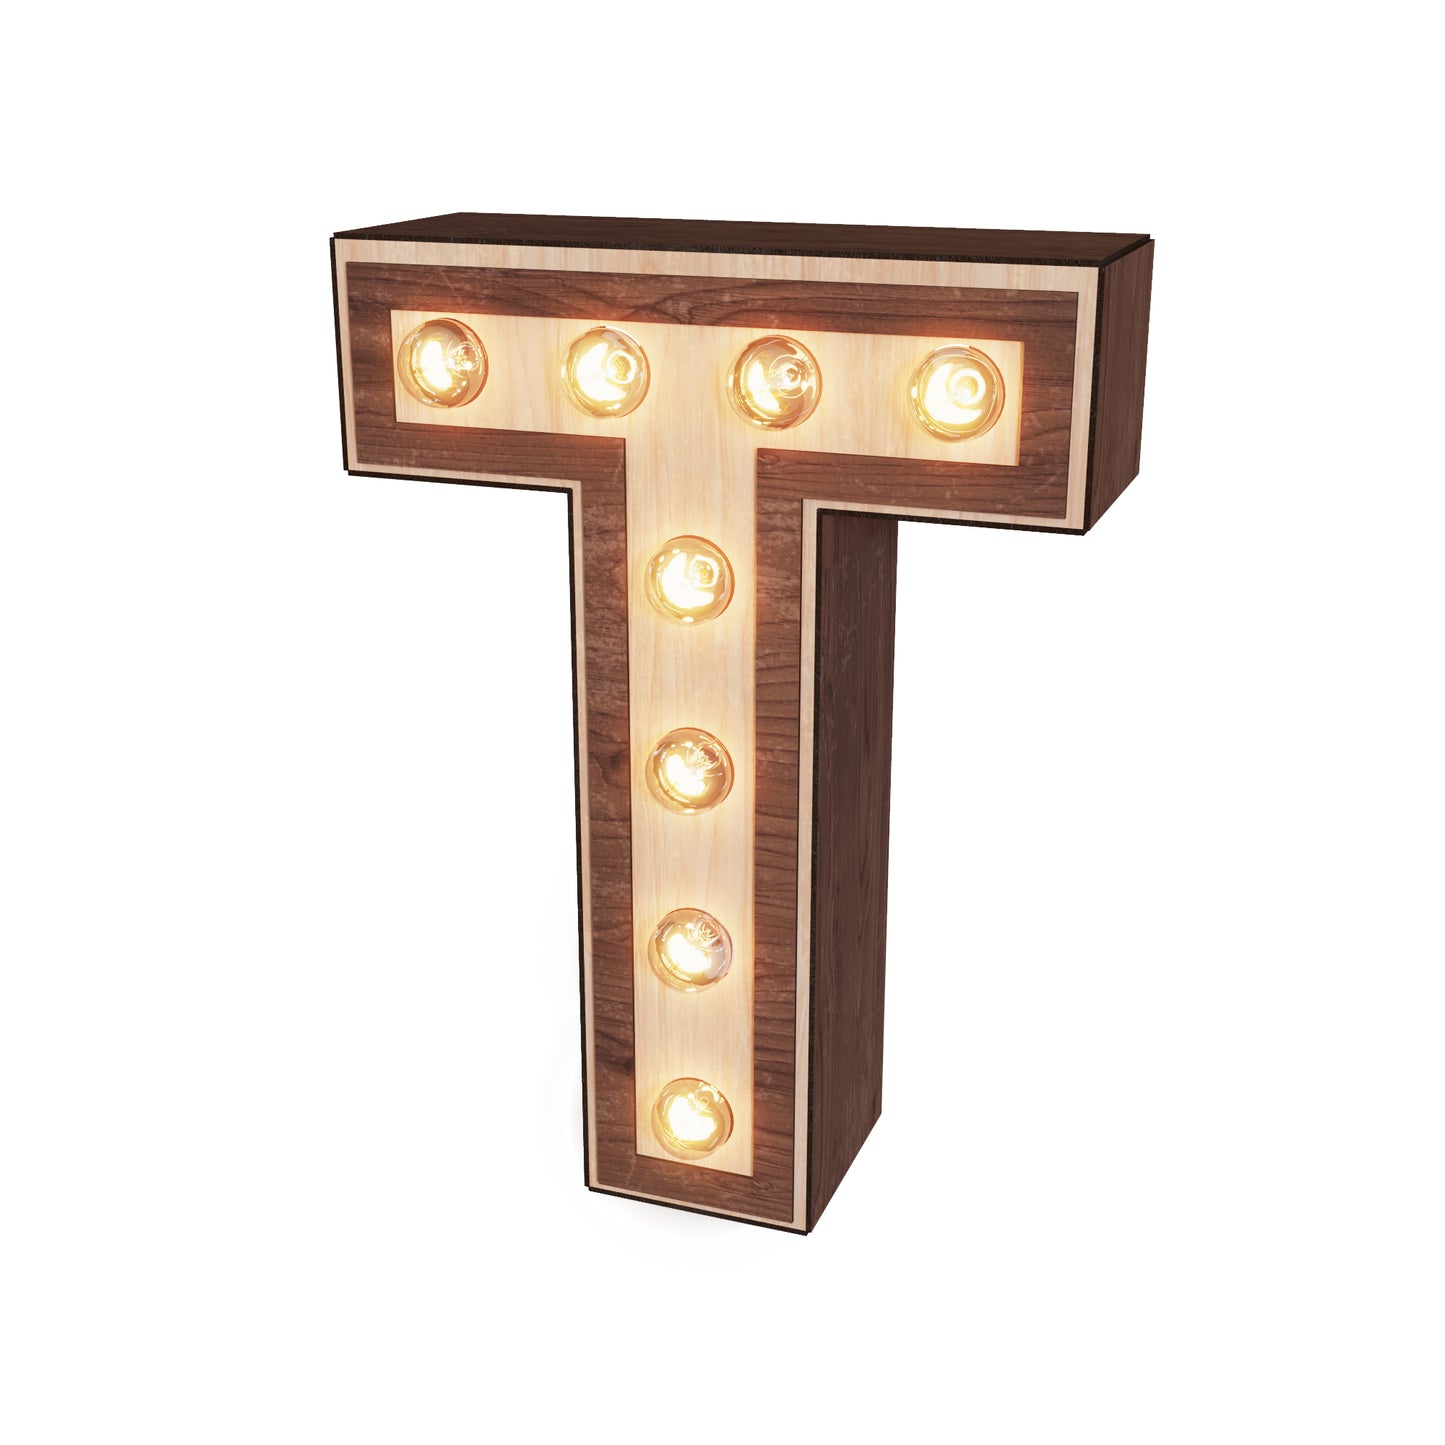 Light-up Marquee Letter Display "T"